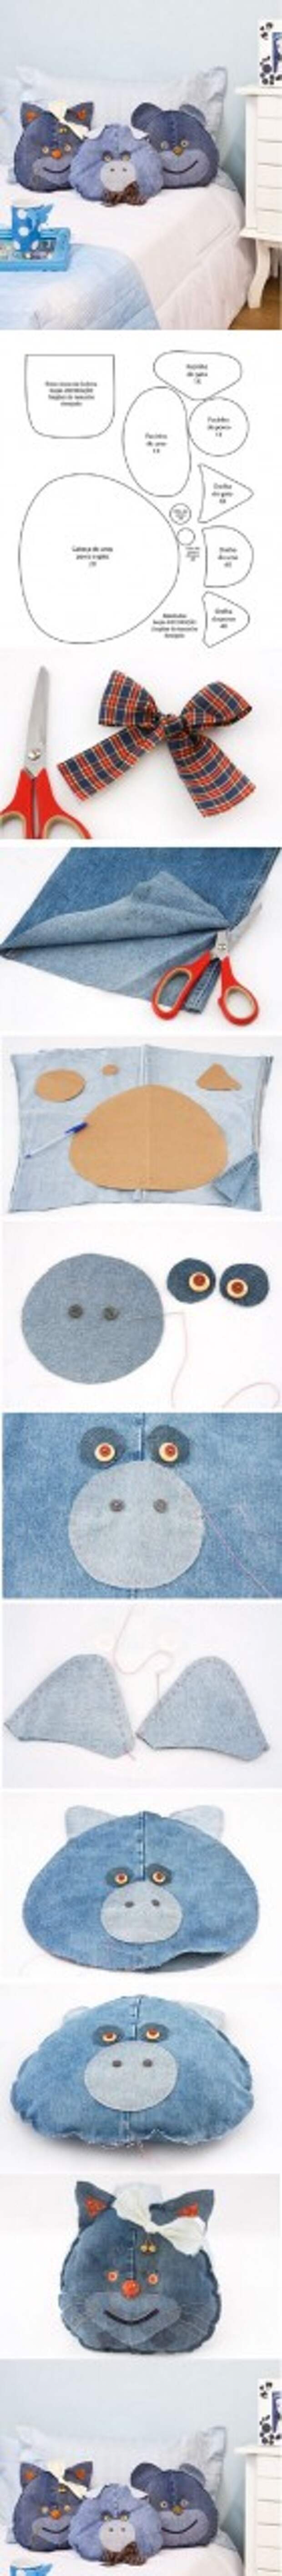 DIY Funny Jeans Pillows: 